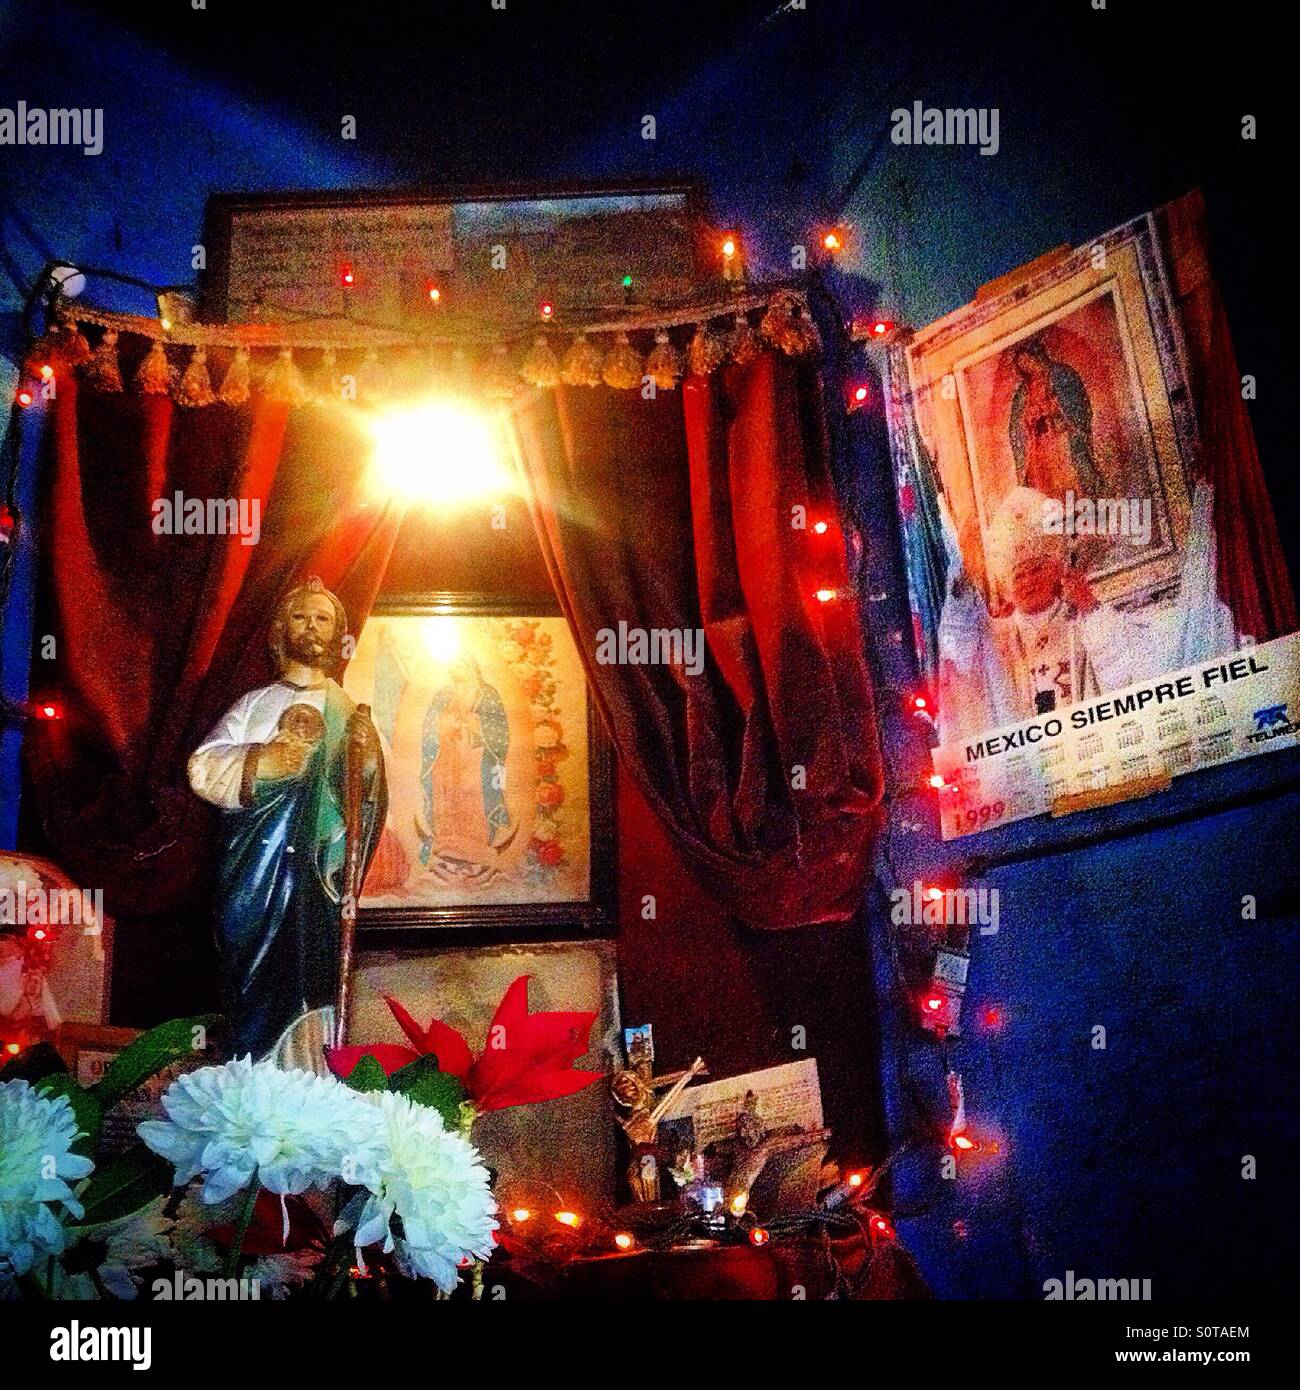 An altar with images of Sain Jude Thaddeus and Our Lady of Guadalupe decorated with electric lights and roses in Colonia Roma, Mexico City, Mexico Stock Photo